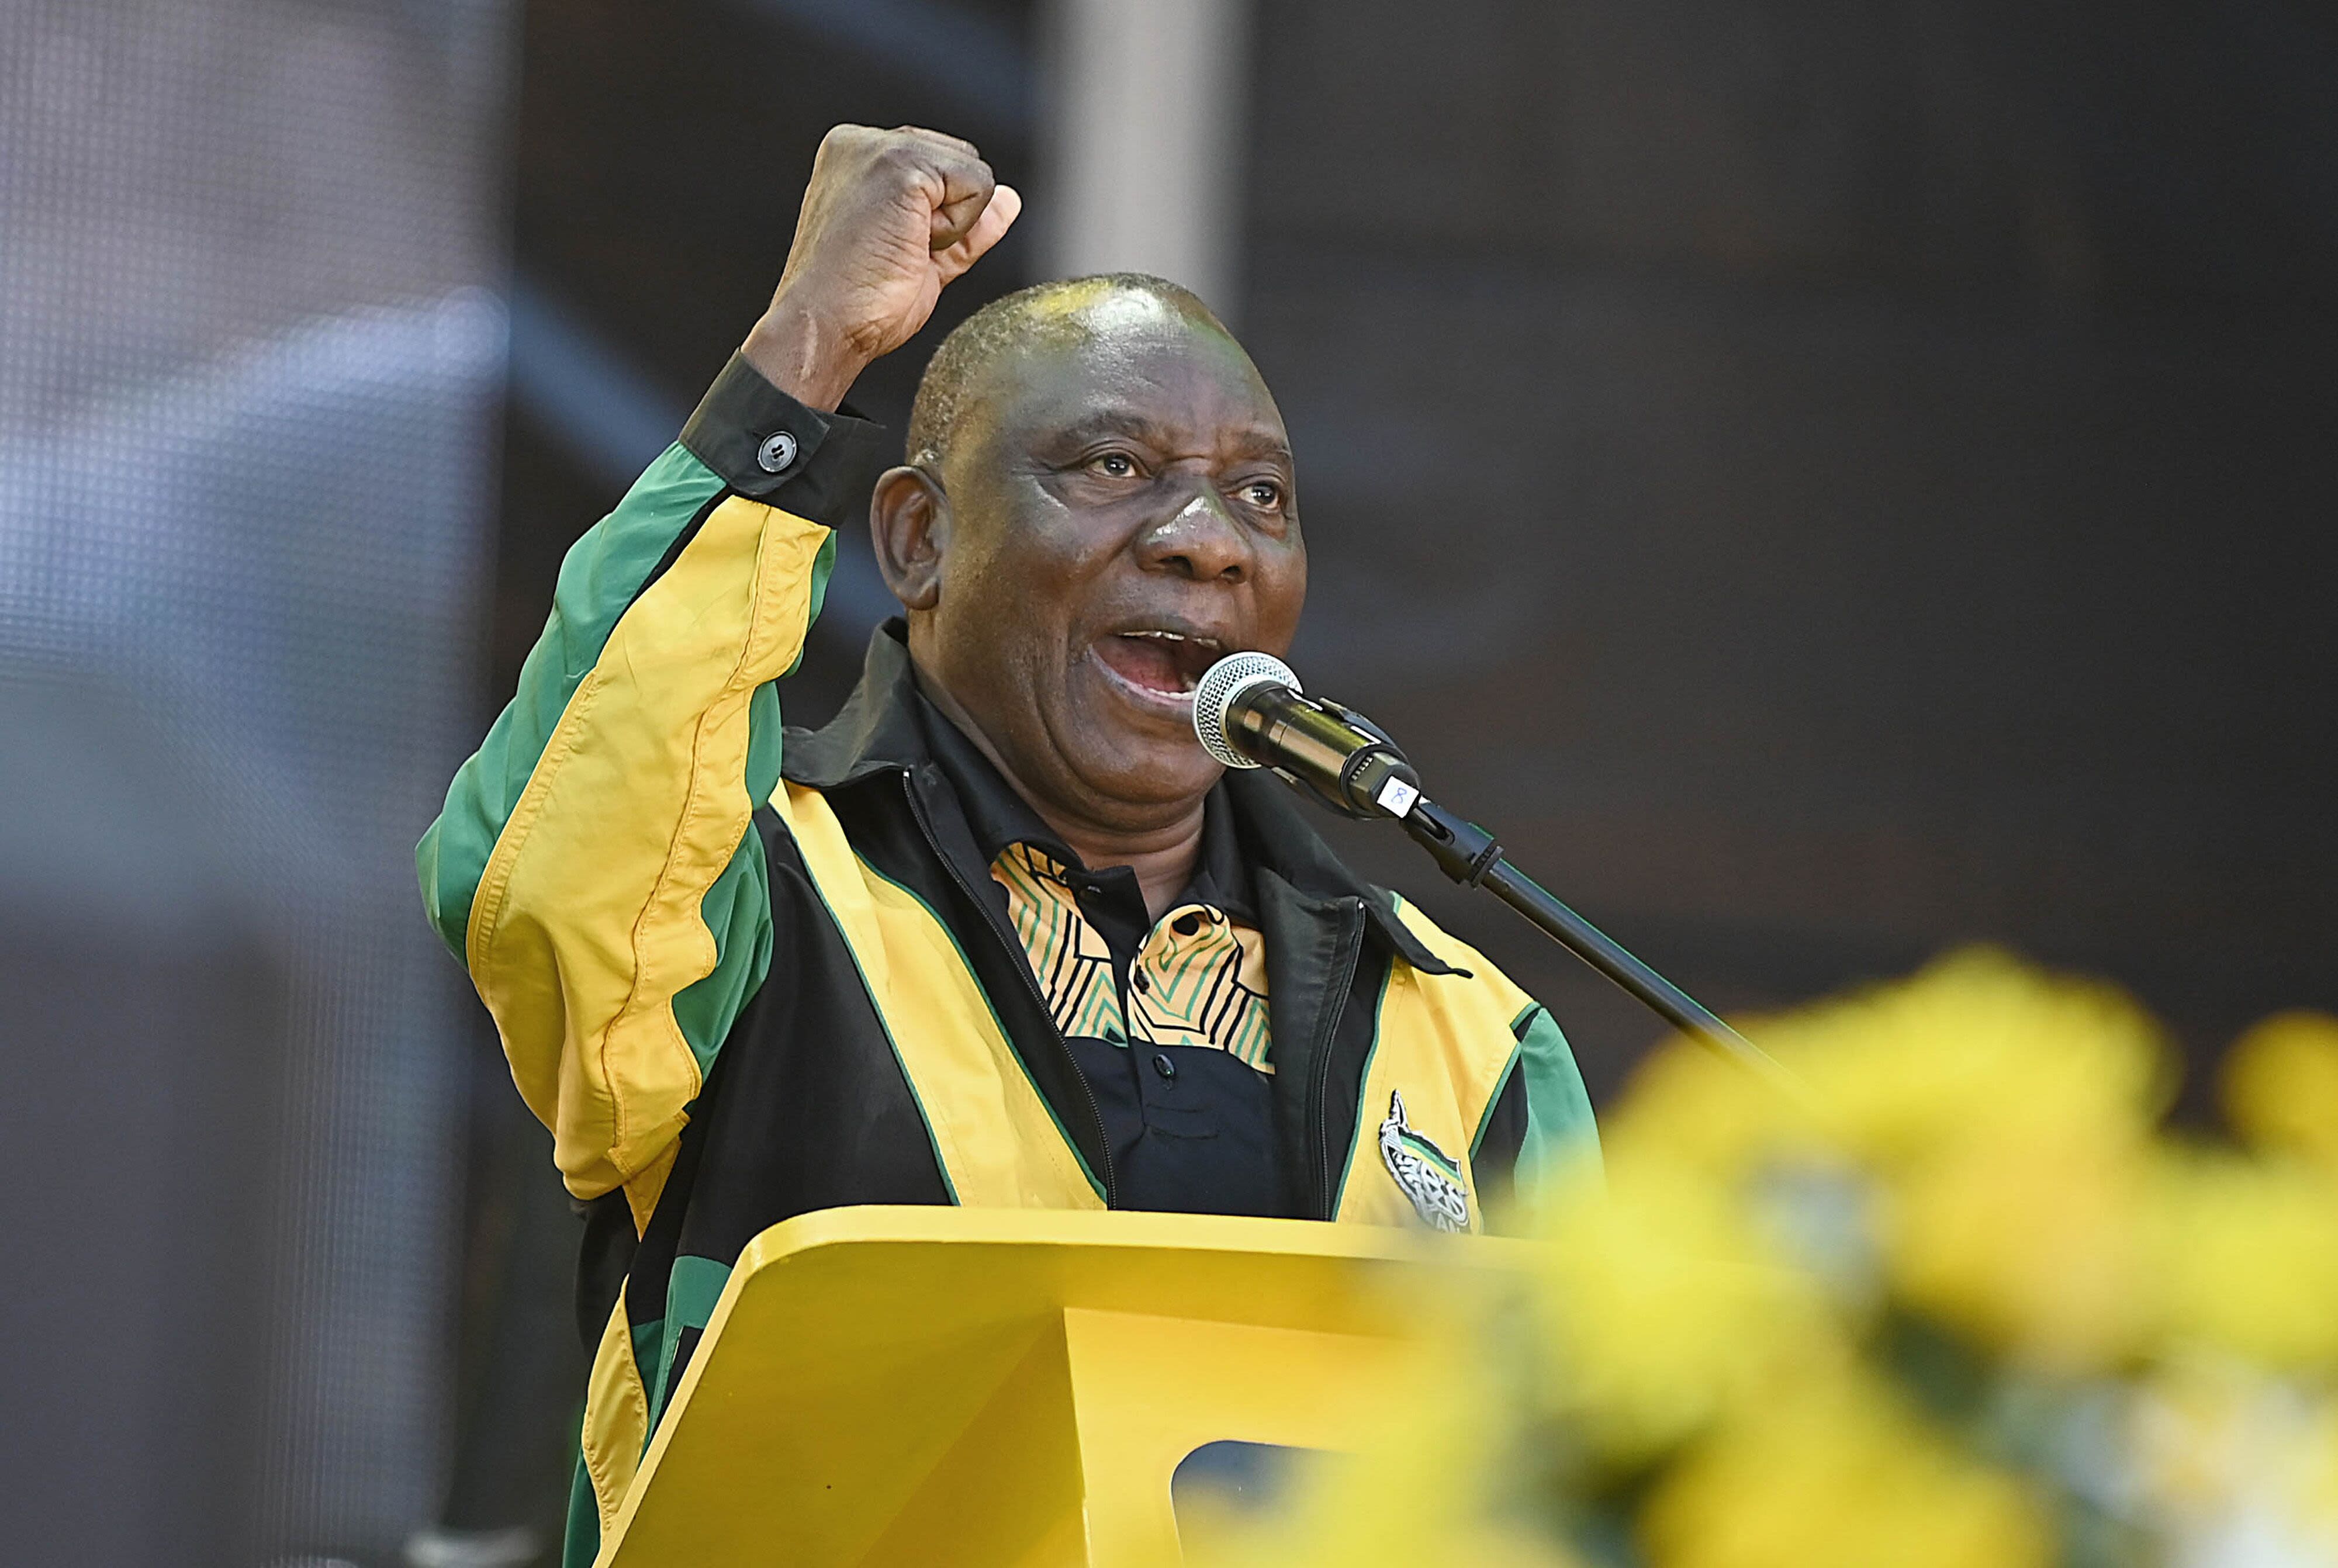 South Africa’s Shock Election Imperils Business-Driven Reforms